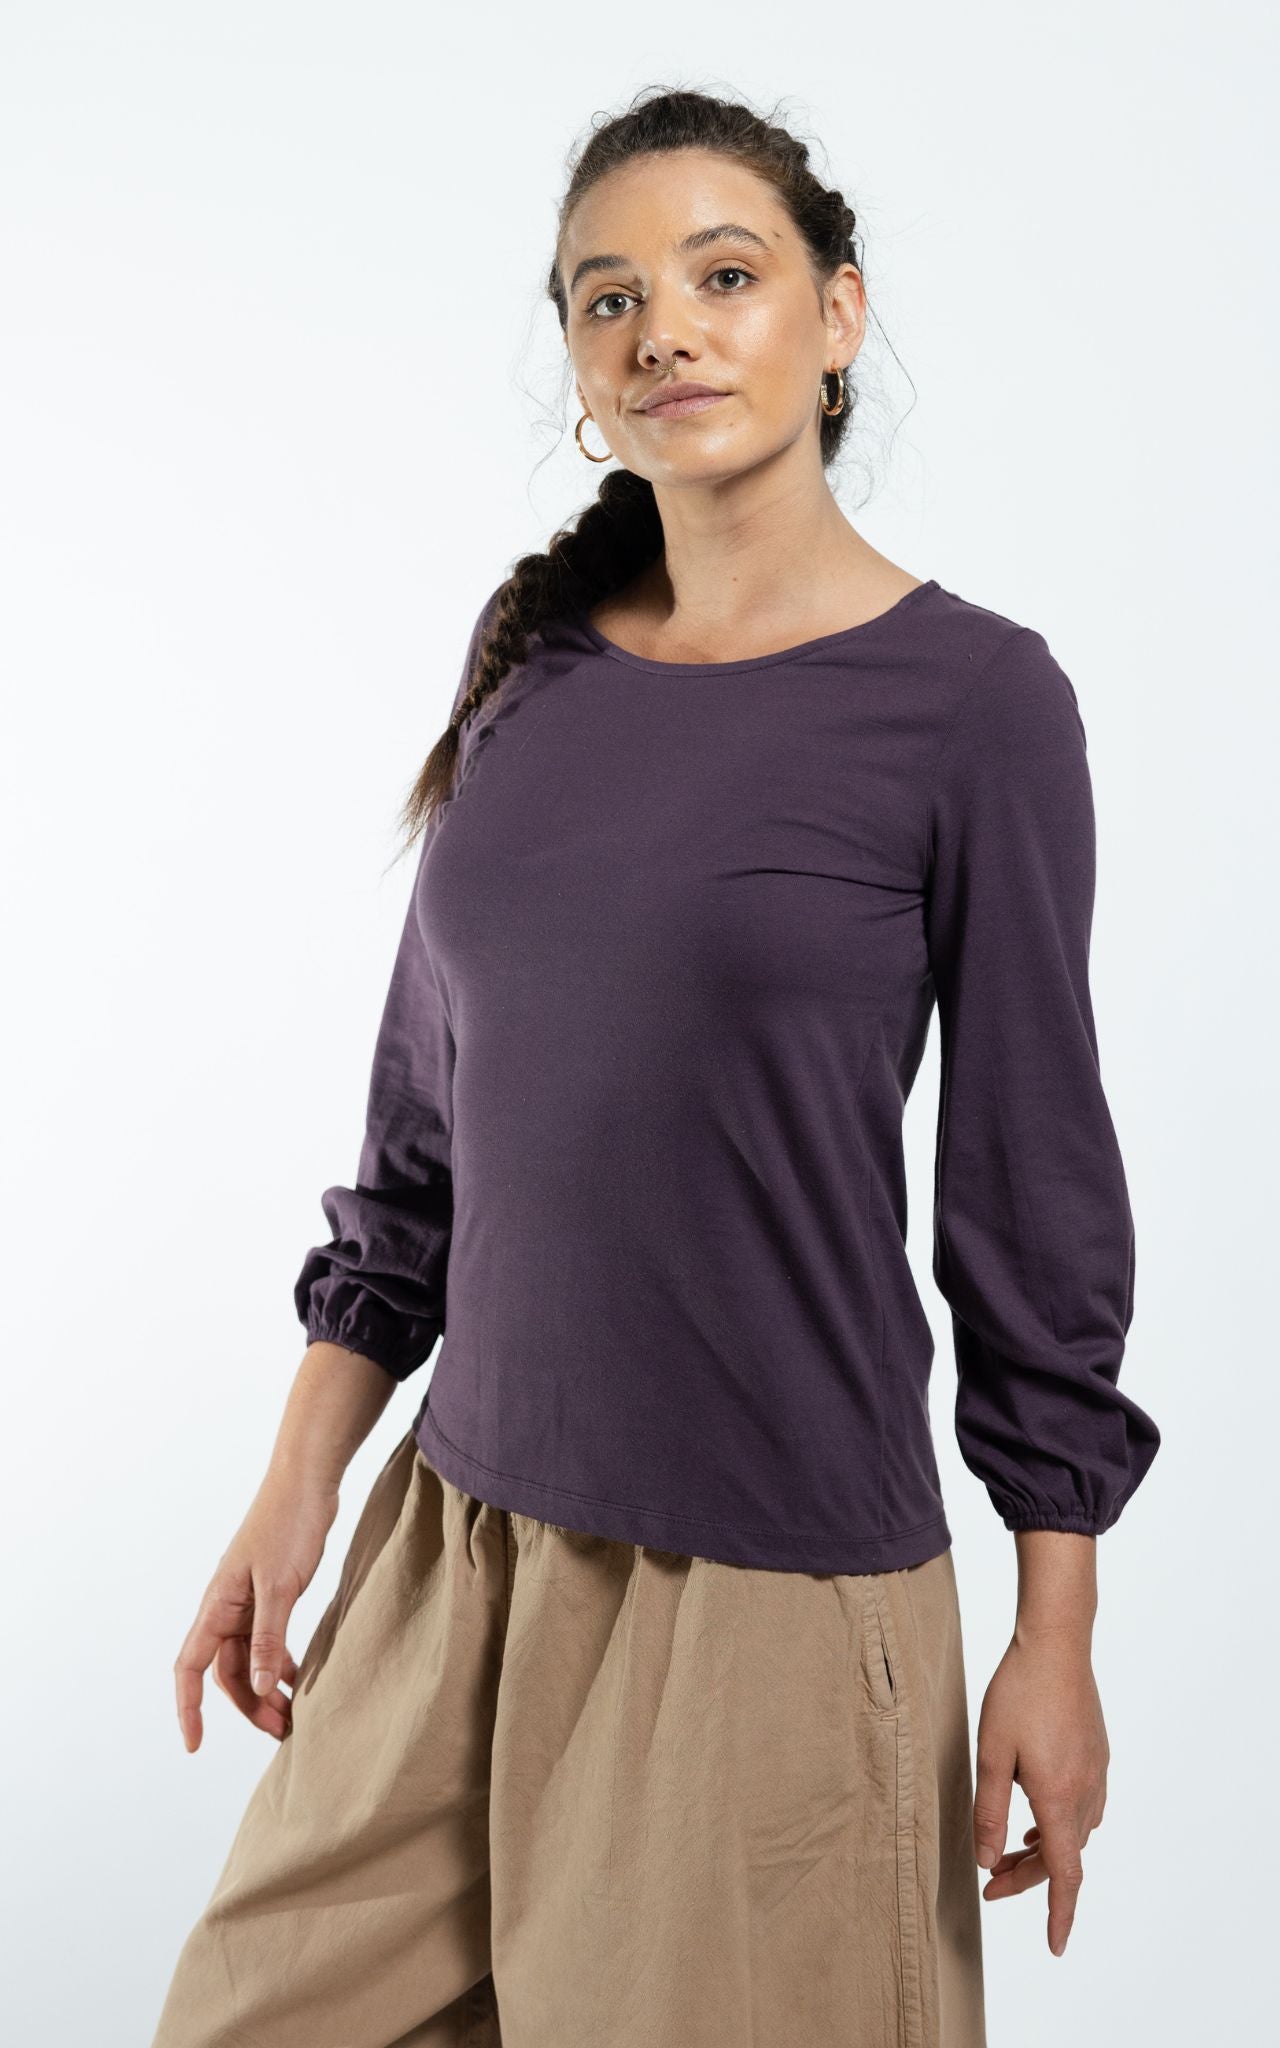 Surya The Label Ethical Organic Cotton 'Zoé' Top made in Nepal - Eggplant